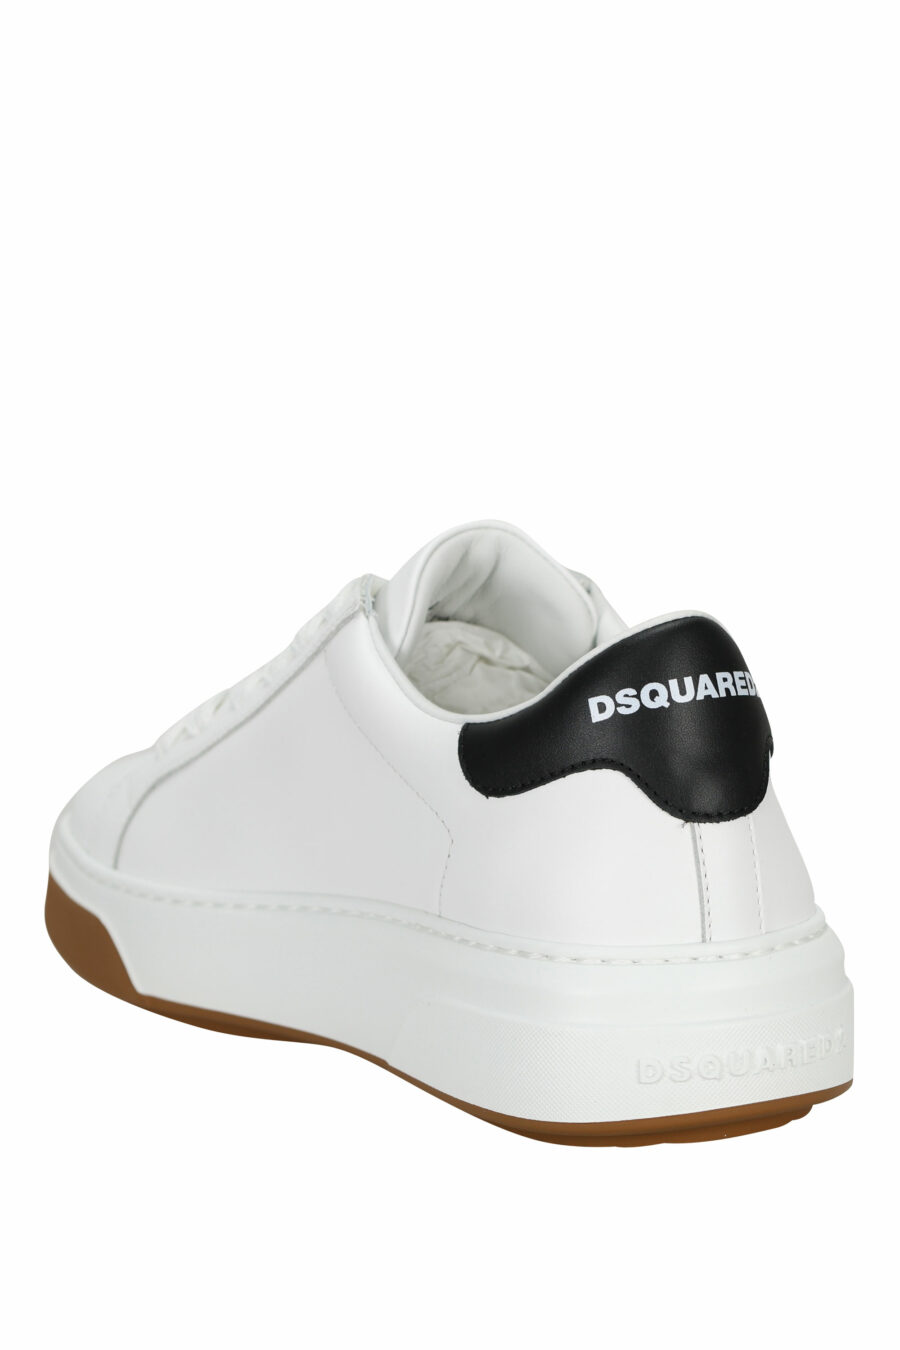 White trainers with red mini-logo and two-tone sole - 8055777319338 4